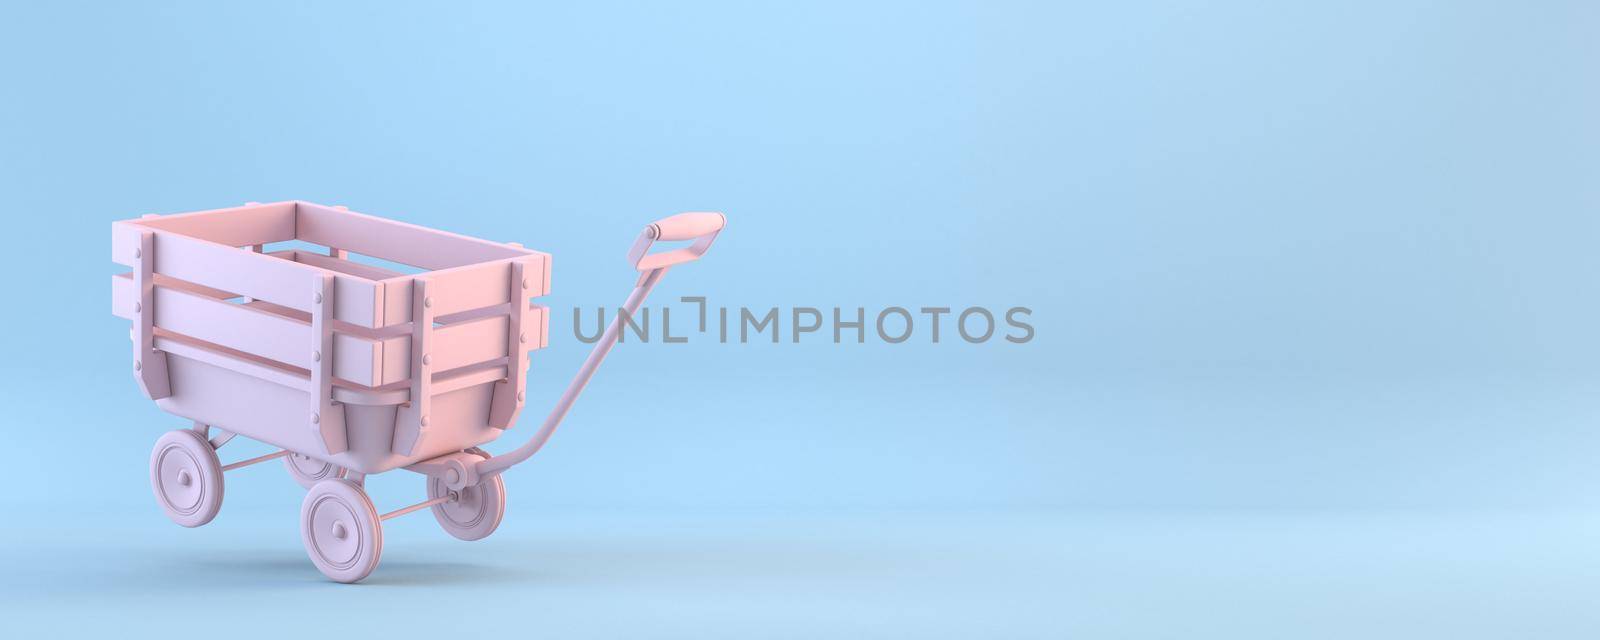 Toy mini wagon 3D rendering illustration isolated on blue background